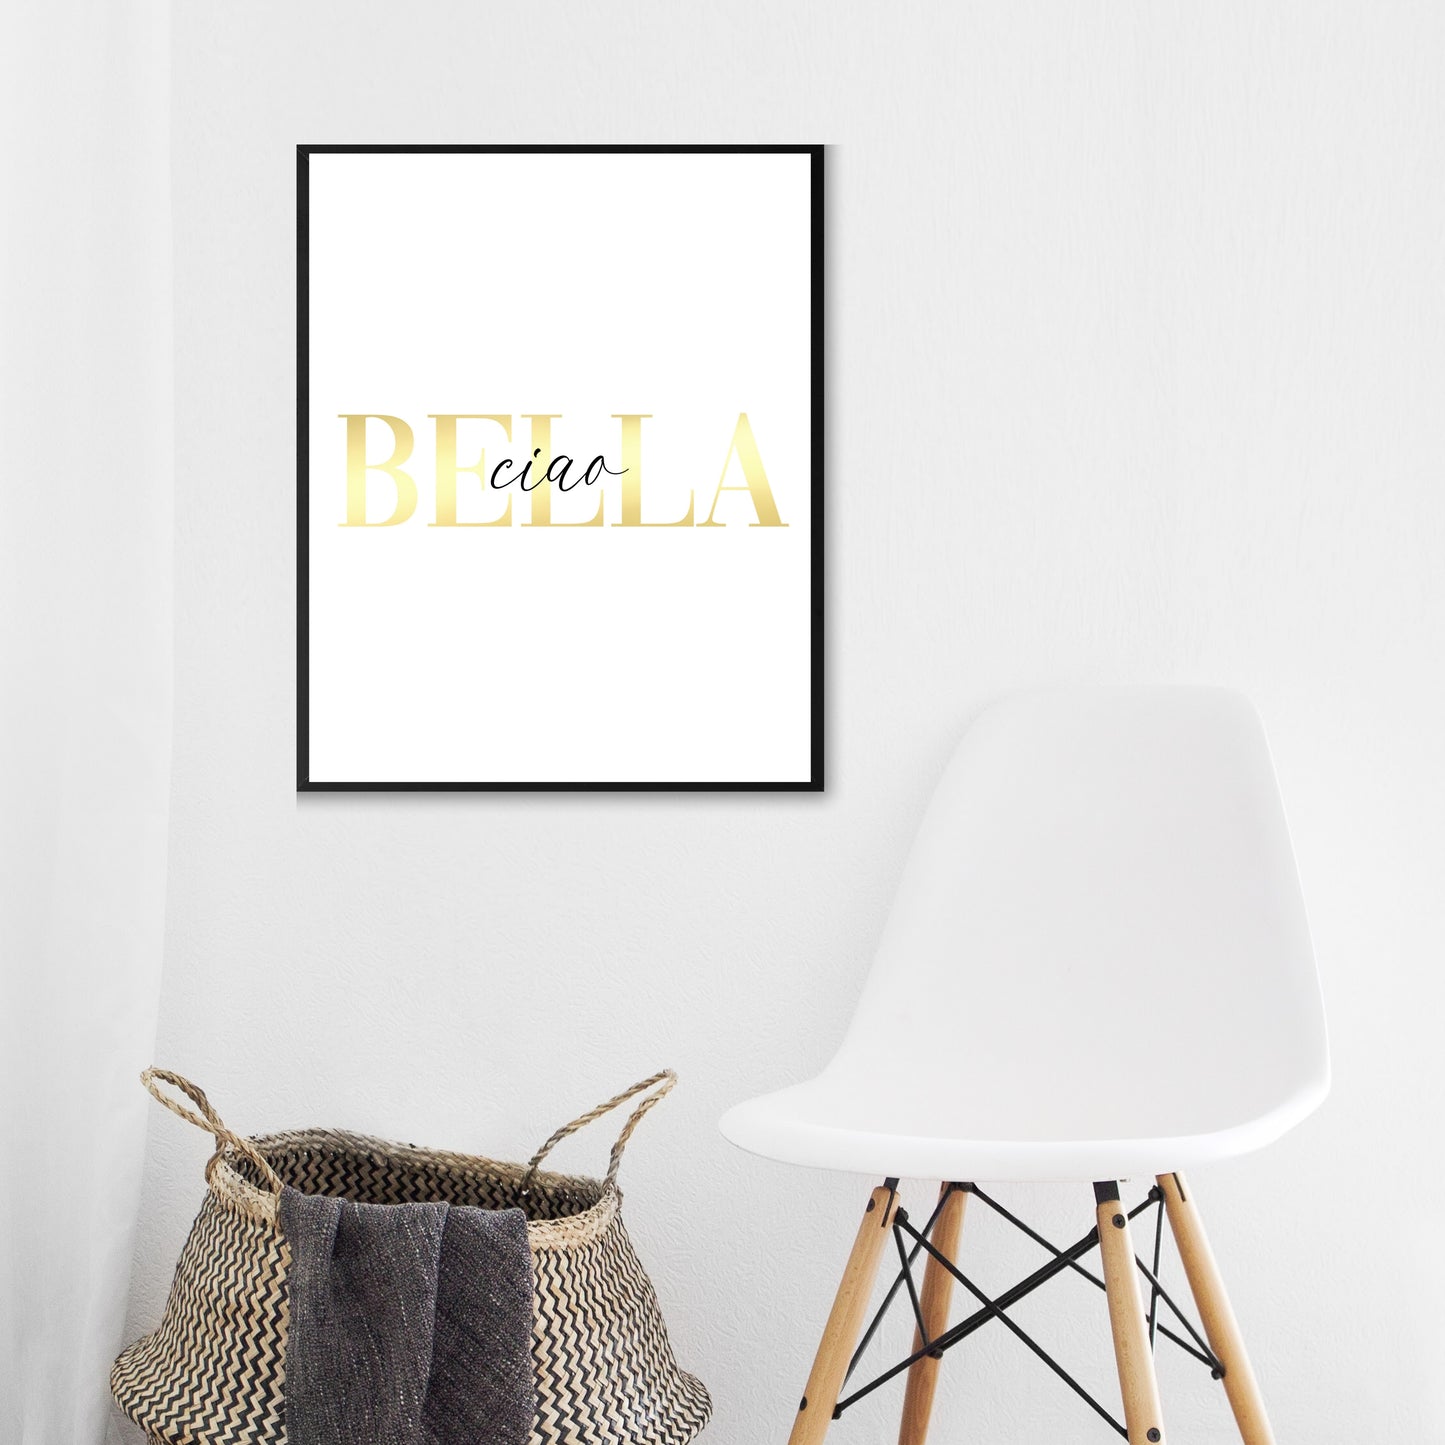 "Ciao Bella" In Black And Gold, Printable Art